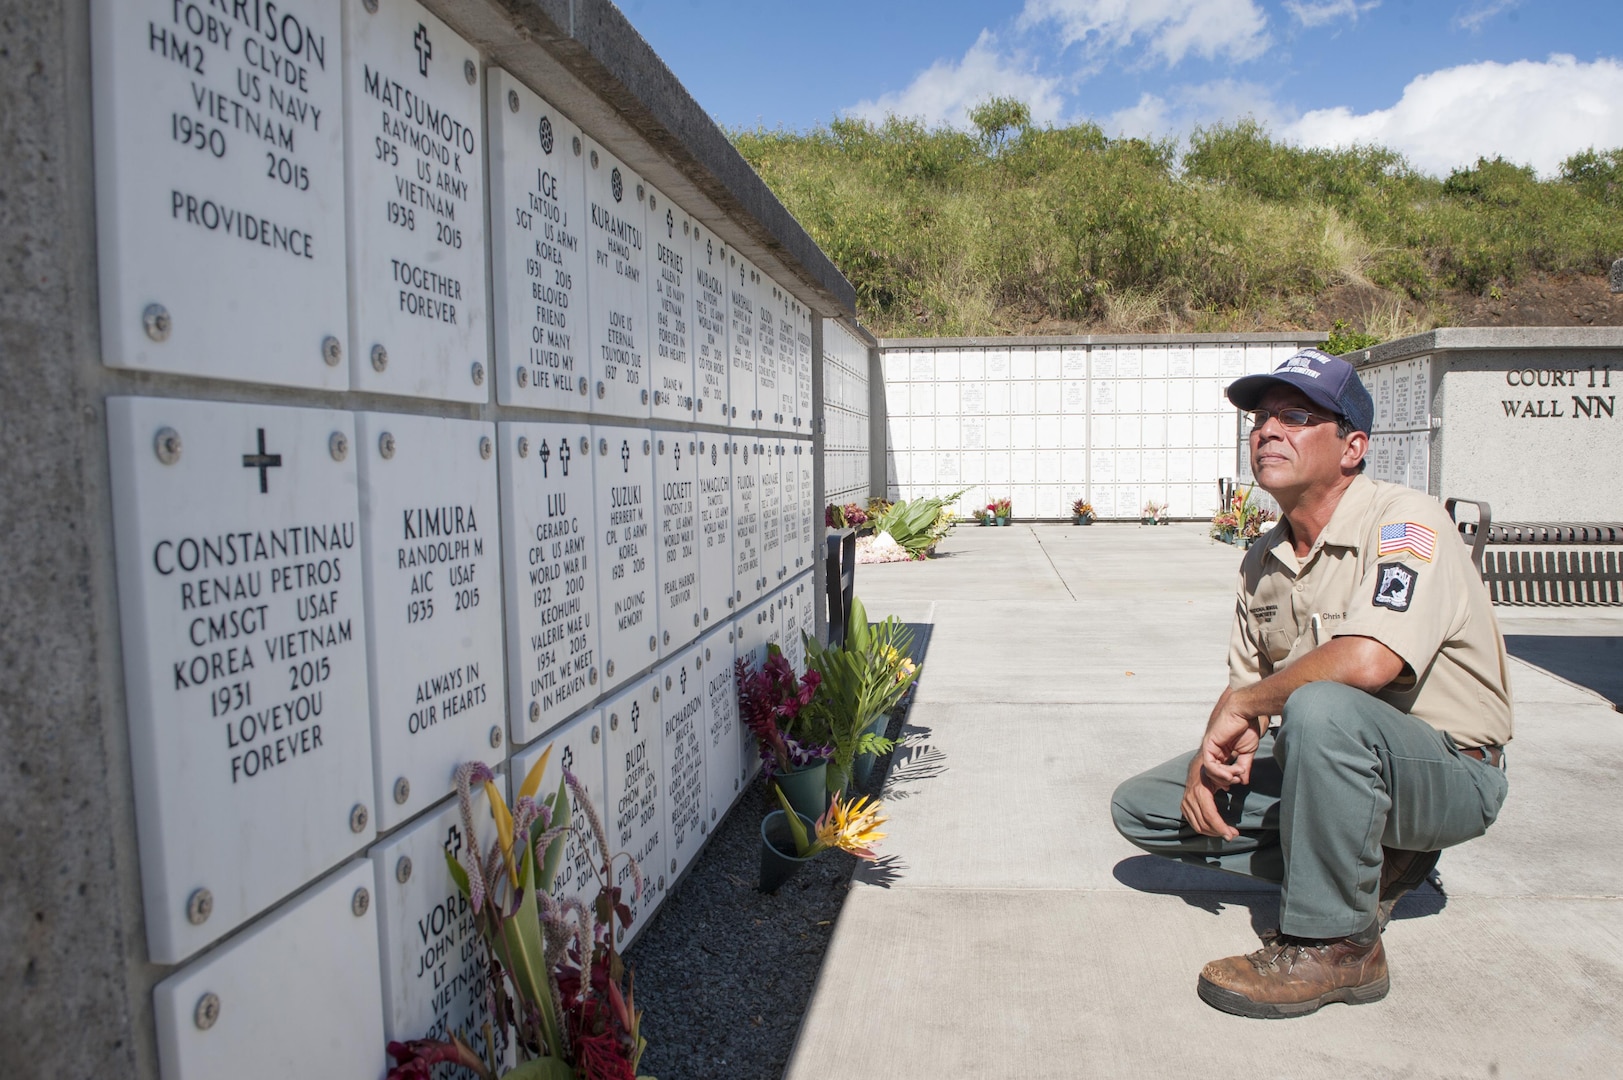 Chris Farley, U.S. Navy veteran and National Memorial Cemetery of the Pacific (NMCP) caretaker, reads names of fallen service members at the NMCP Nov. 28, 2015, in Honolulu. Farley is a U.S. Navy veteran who served from 1982 to 1987 as an air traffic controller. He is responsible for the maintenance of the 112.5 acres of land that make up the cemetery, the 56,971 gravesites of those who are interred in-ground or in-columbarium, and the 28,788 fallen who are memorialized in the courts of the missing. (U.S. Air Force photo by Staff Sgt. Christopher Hubenthal)